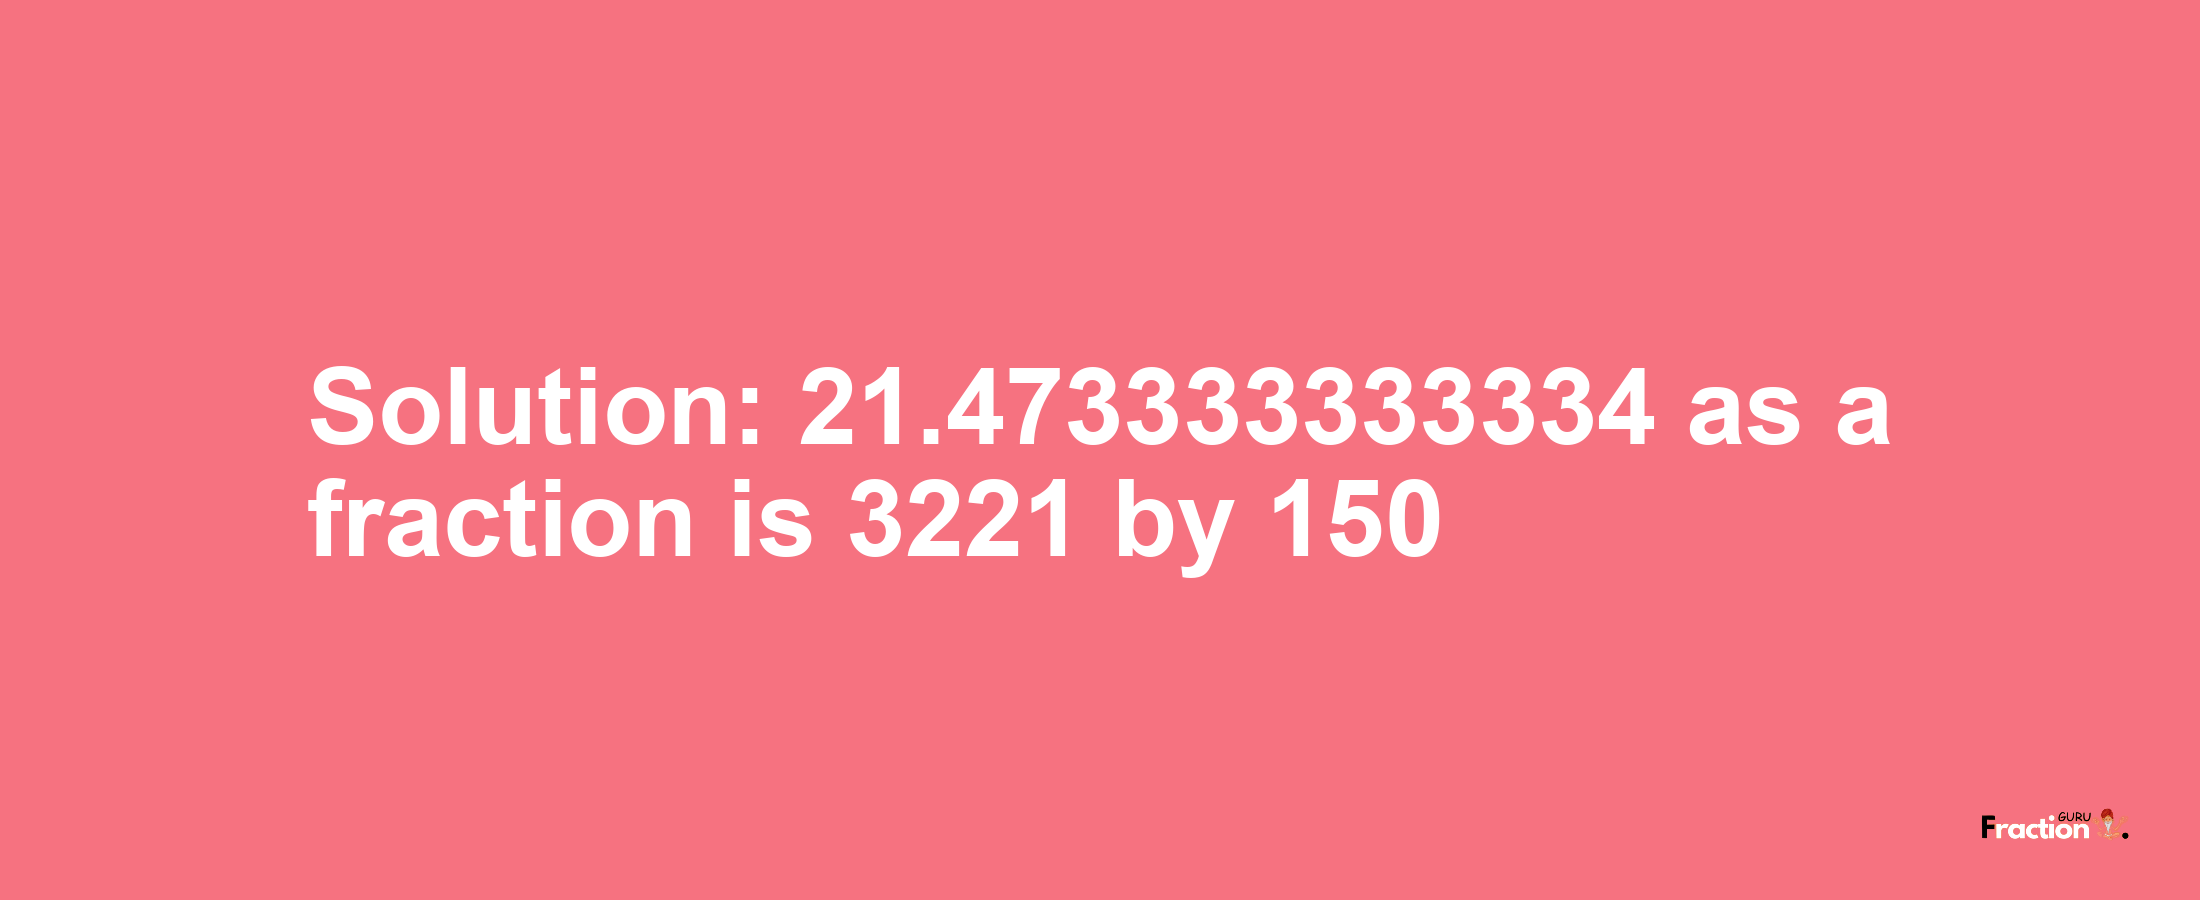 Solution:21.473333333334 as a fraction is 3221/150